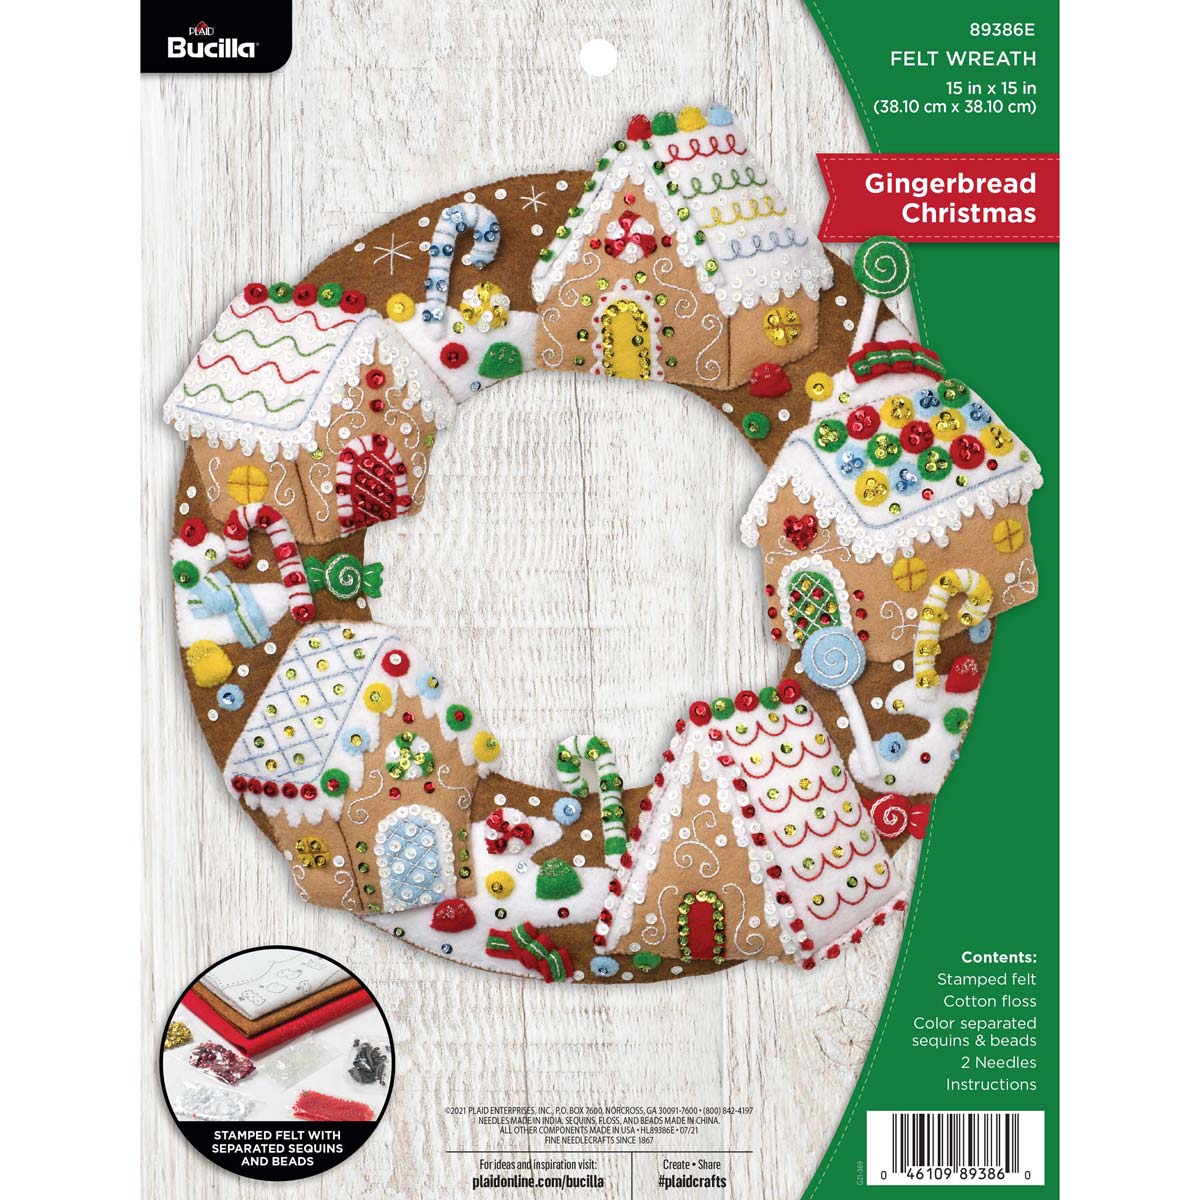 Anna Griffin Gingerbread House Box Making Kit